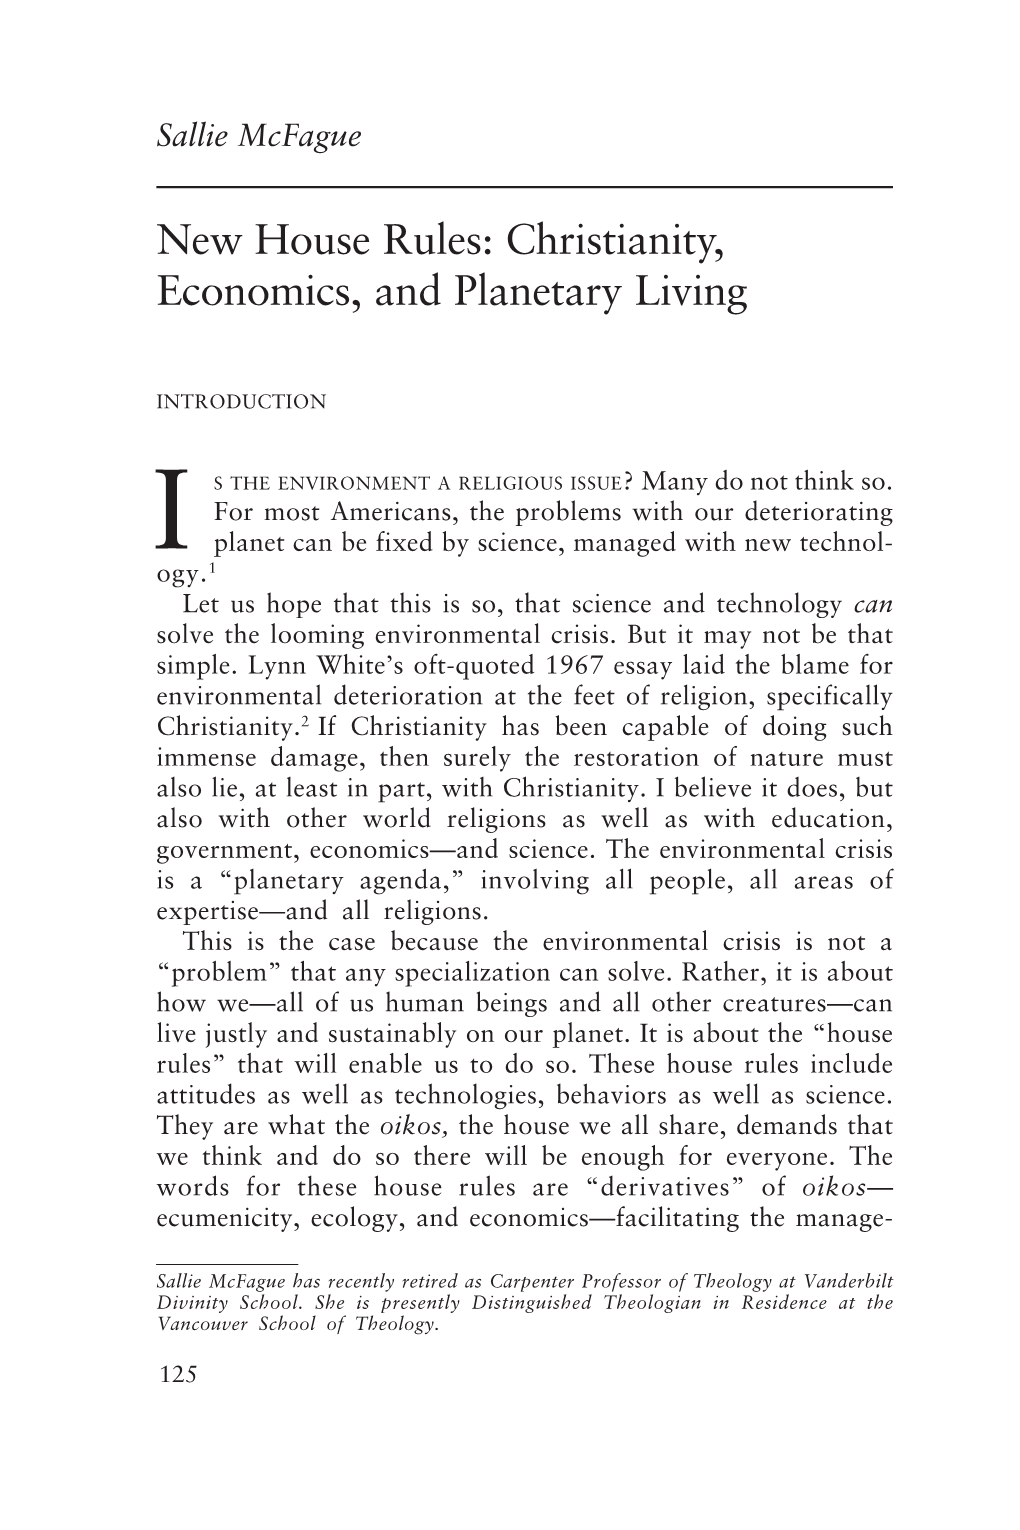 New House Rules: Christianity, Economics, and Planetary Living